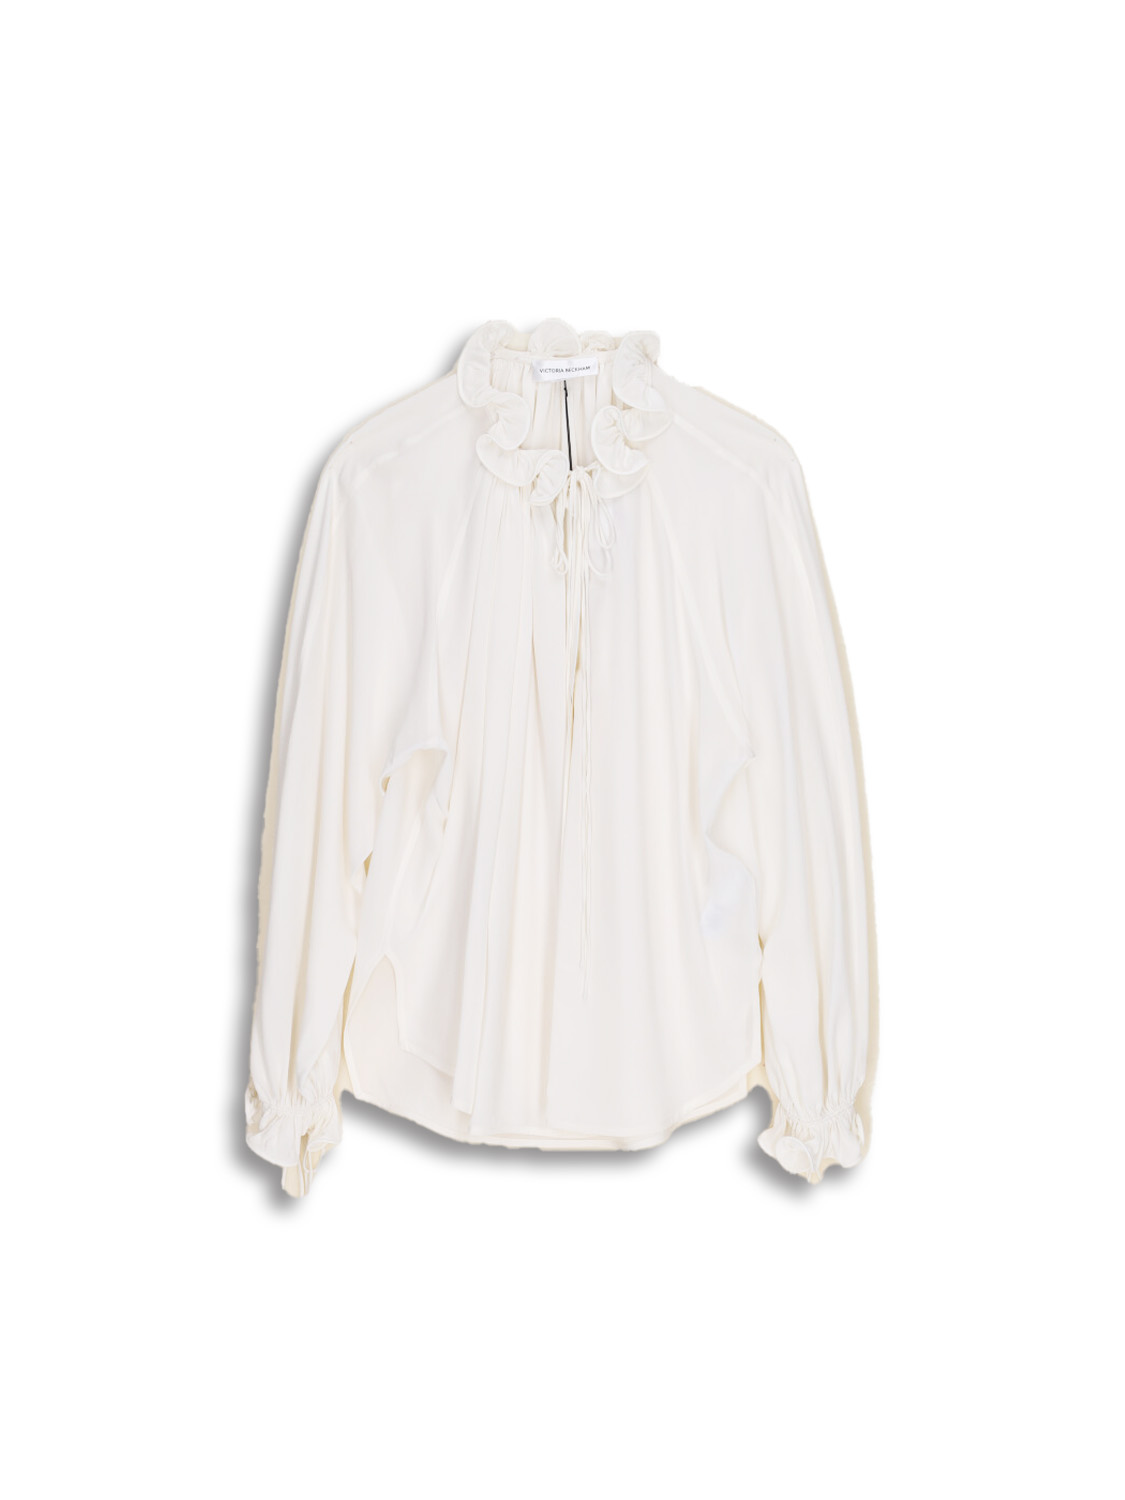 Victoria Beckham Ruched Detail Blouse - Long Sleeve Blouse with Ruched Details made of Silk white 36